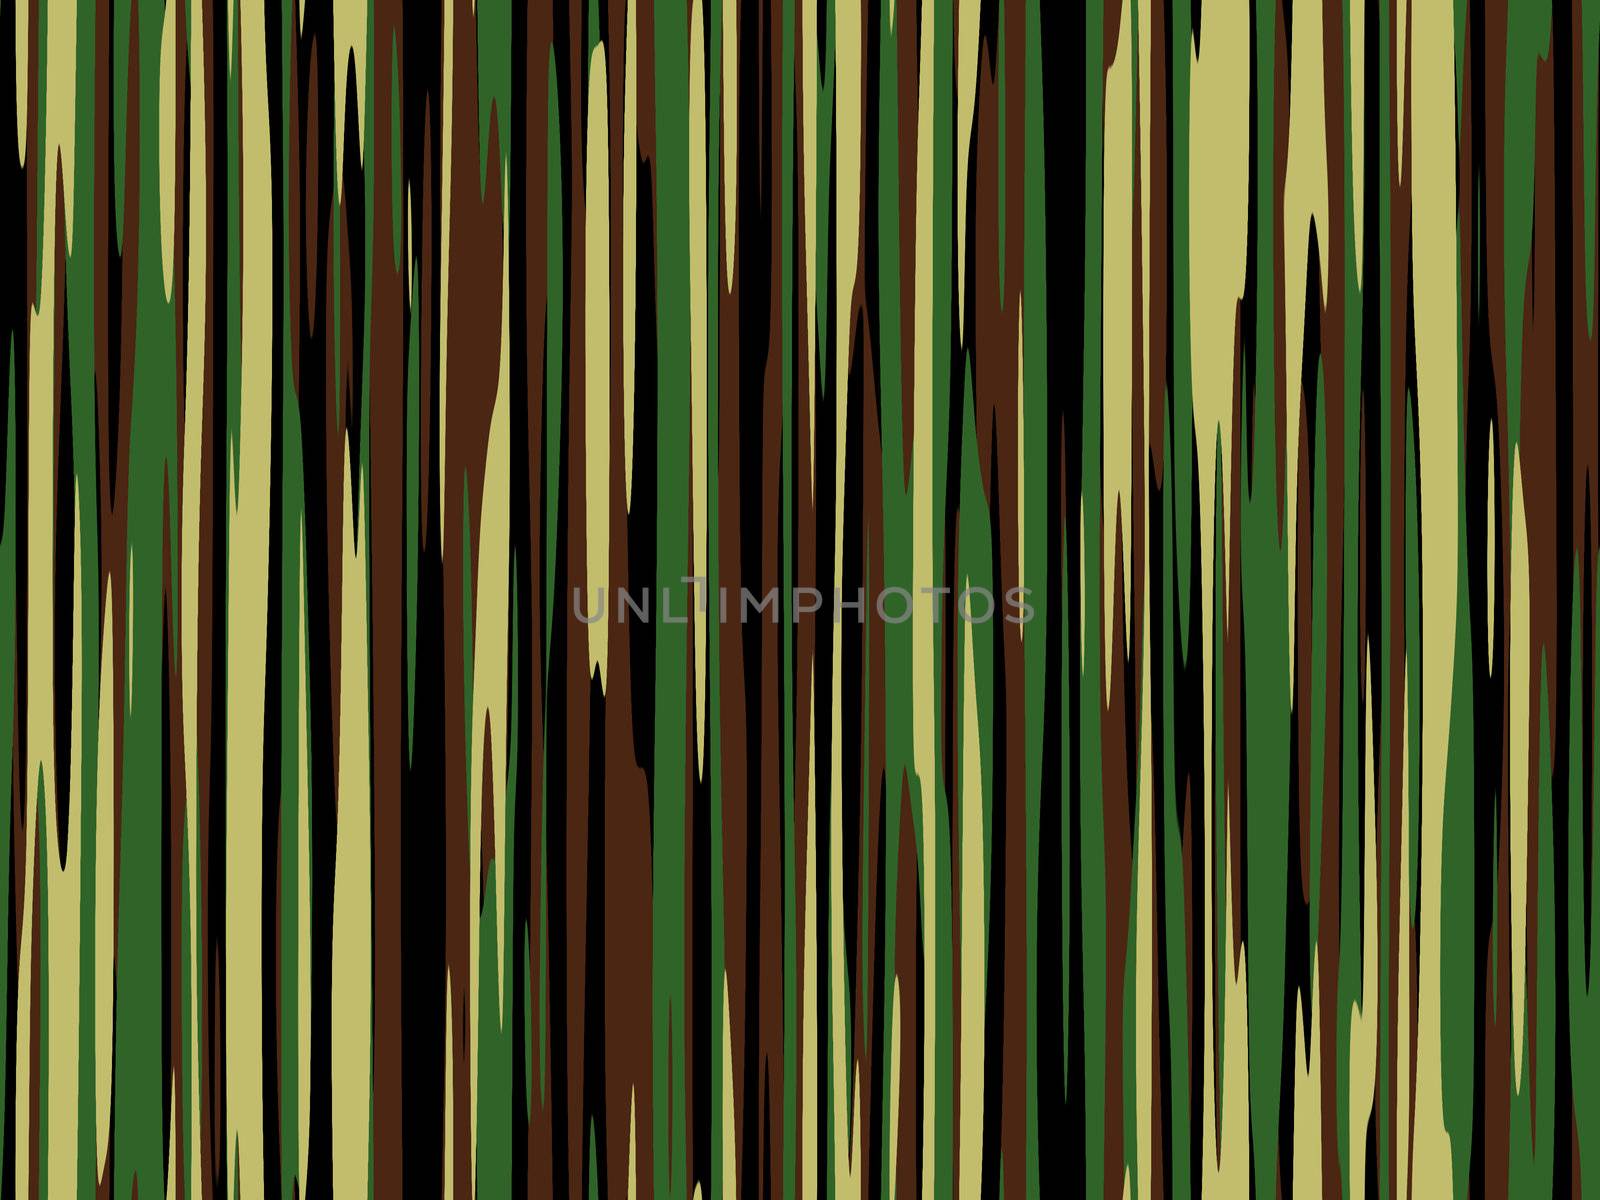 Abstract camouflage stripes by tommroch